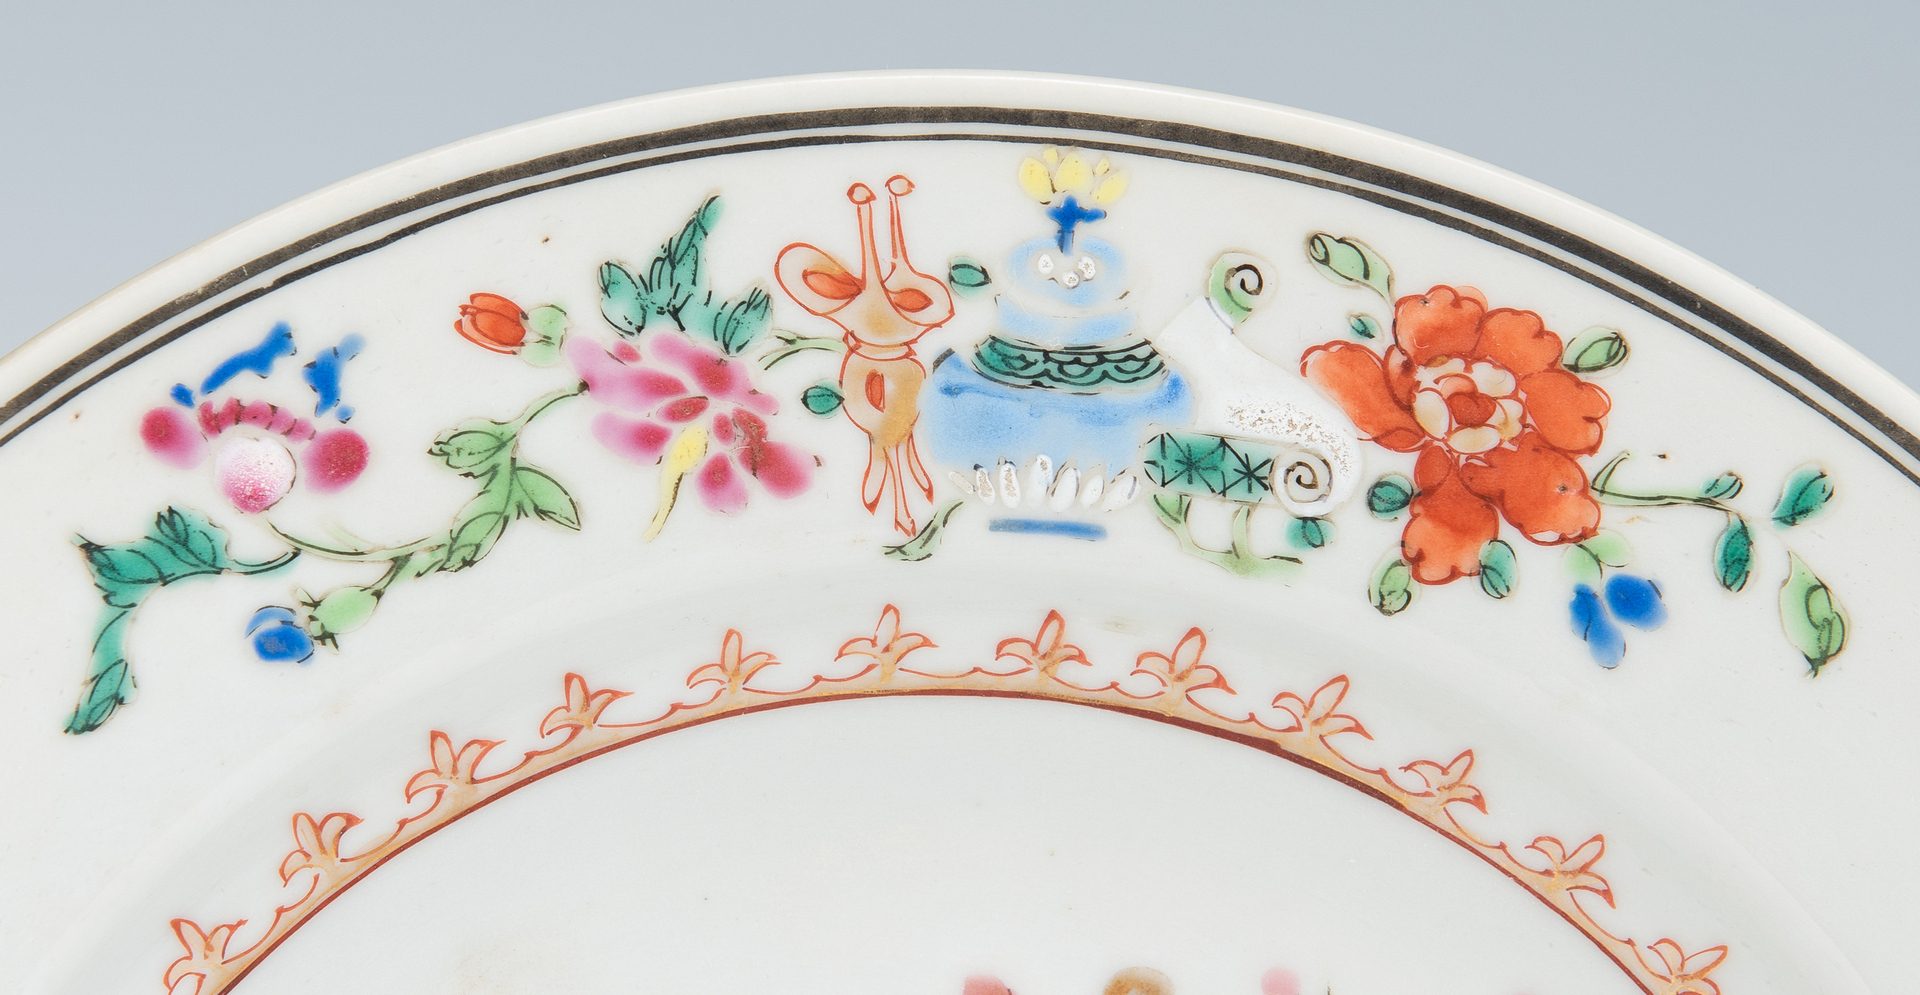 Lot 208: 7 Asian Porcelain Items, incl. 5 Chinese Export, 2 Japanese